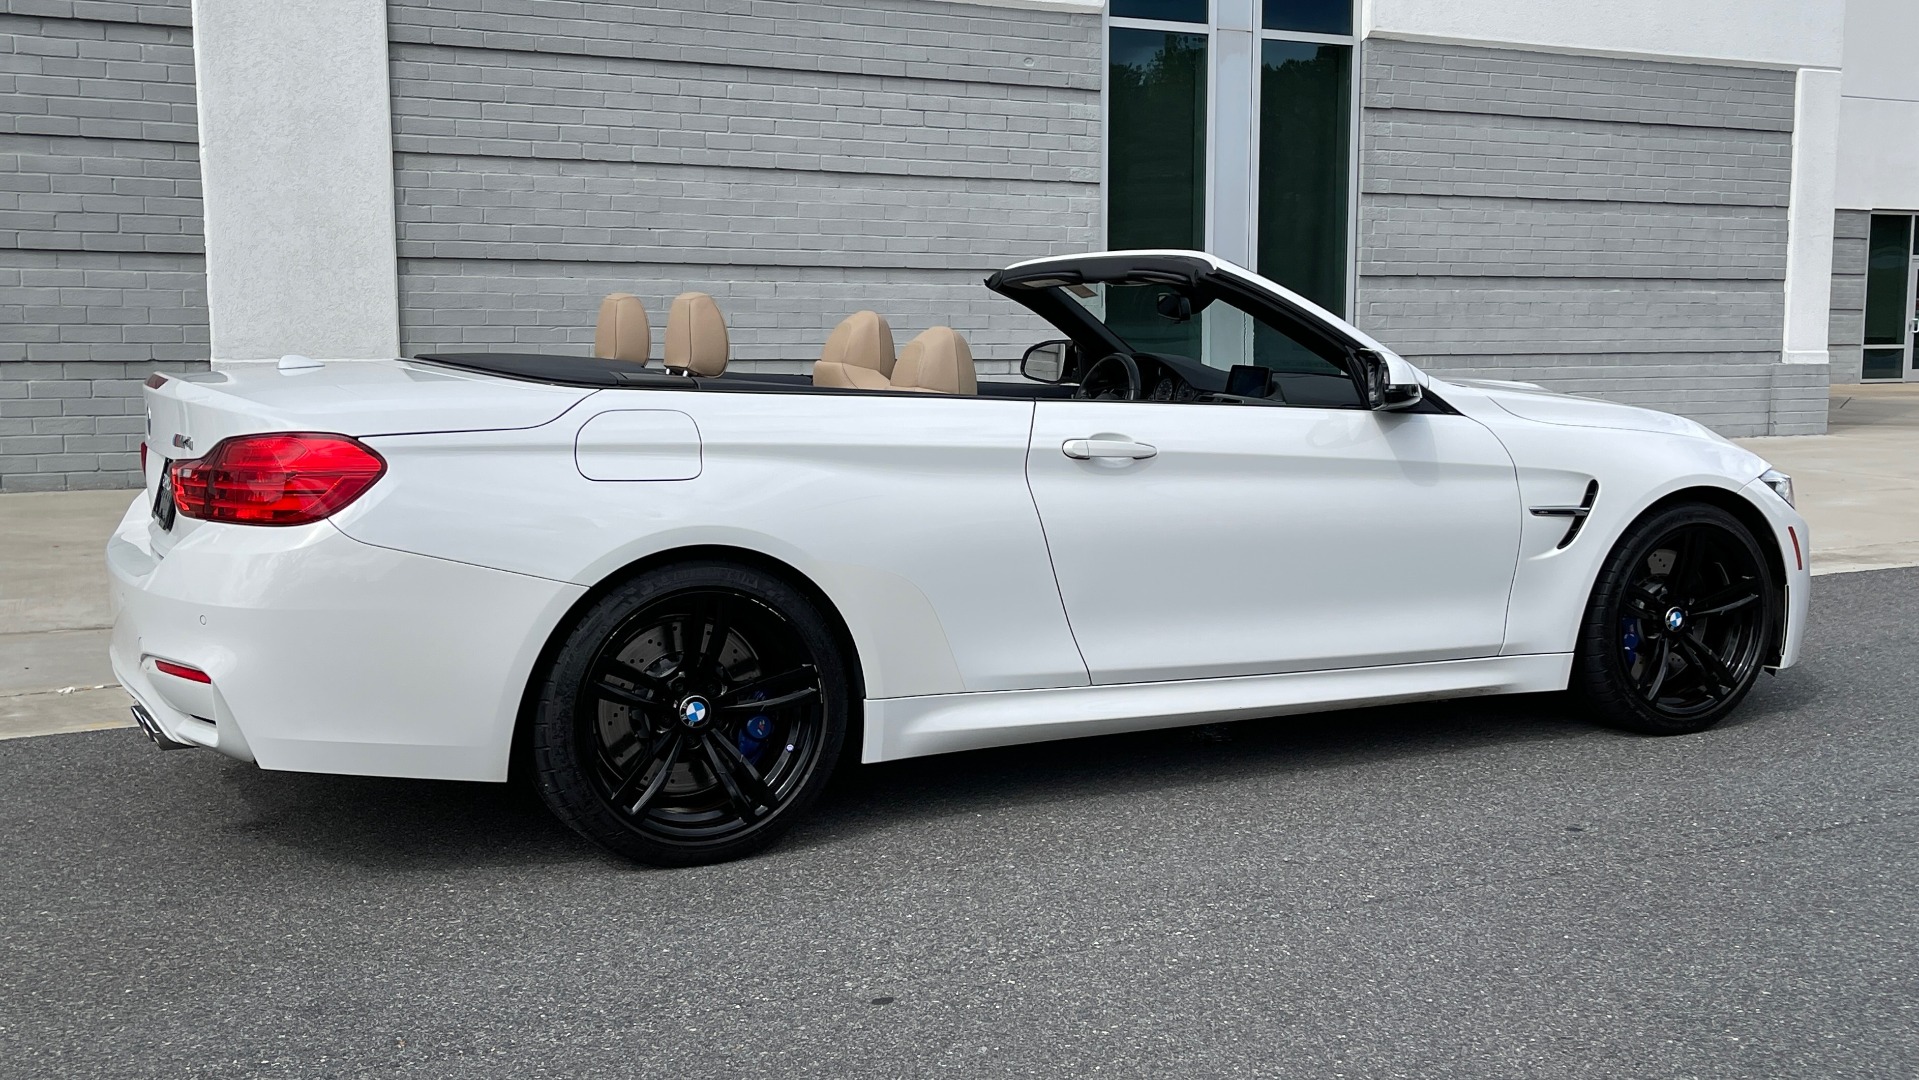 Used 2016 BMW M4 CONVERTIBLE 3.0L / 7-SPD AUTO / EXECUTIVE / ADAPT M SUSP / REARVIEW for sale Sold at Formula Imports in Charlotte NC 28227 4